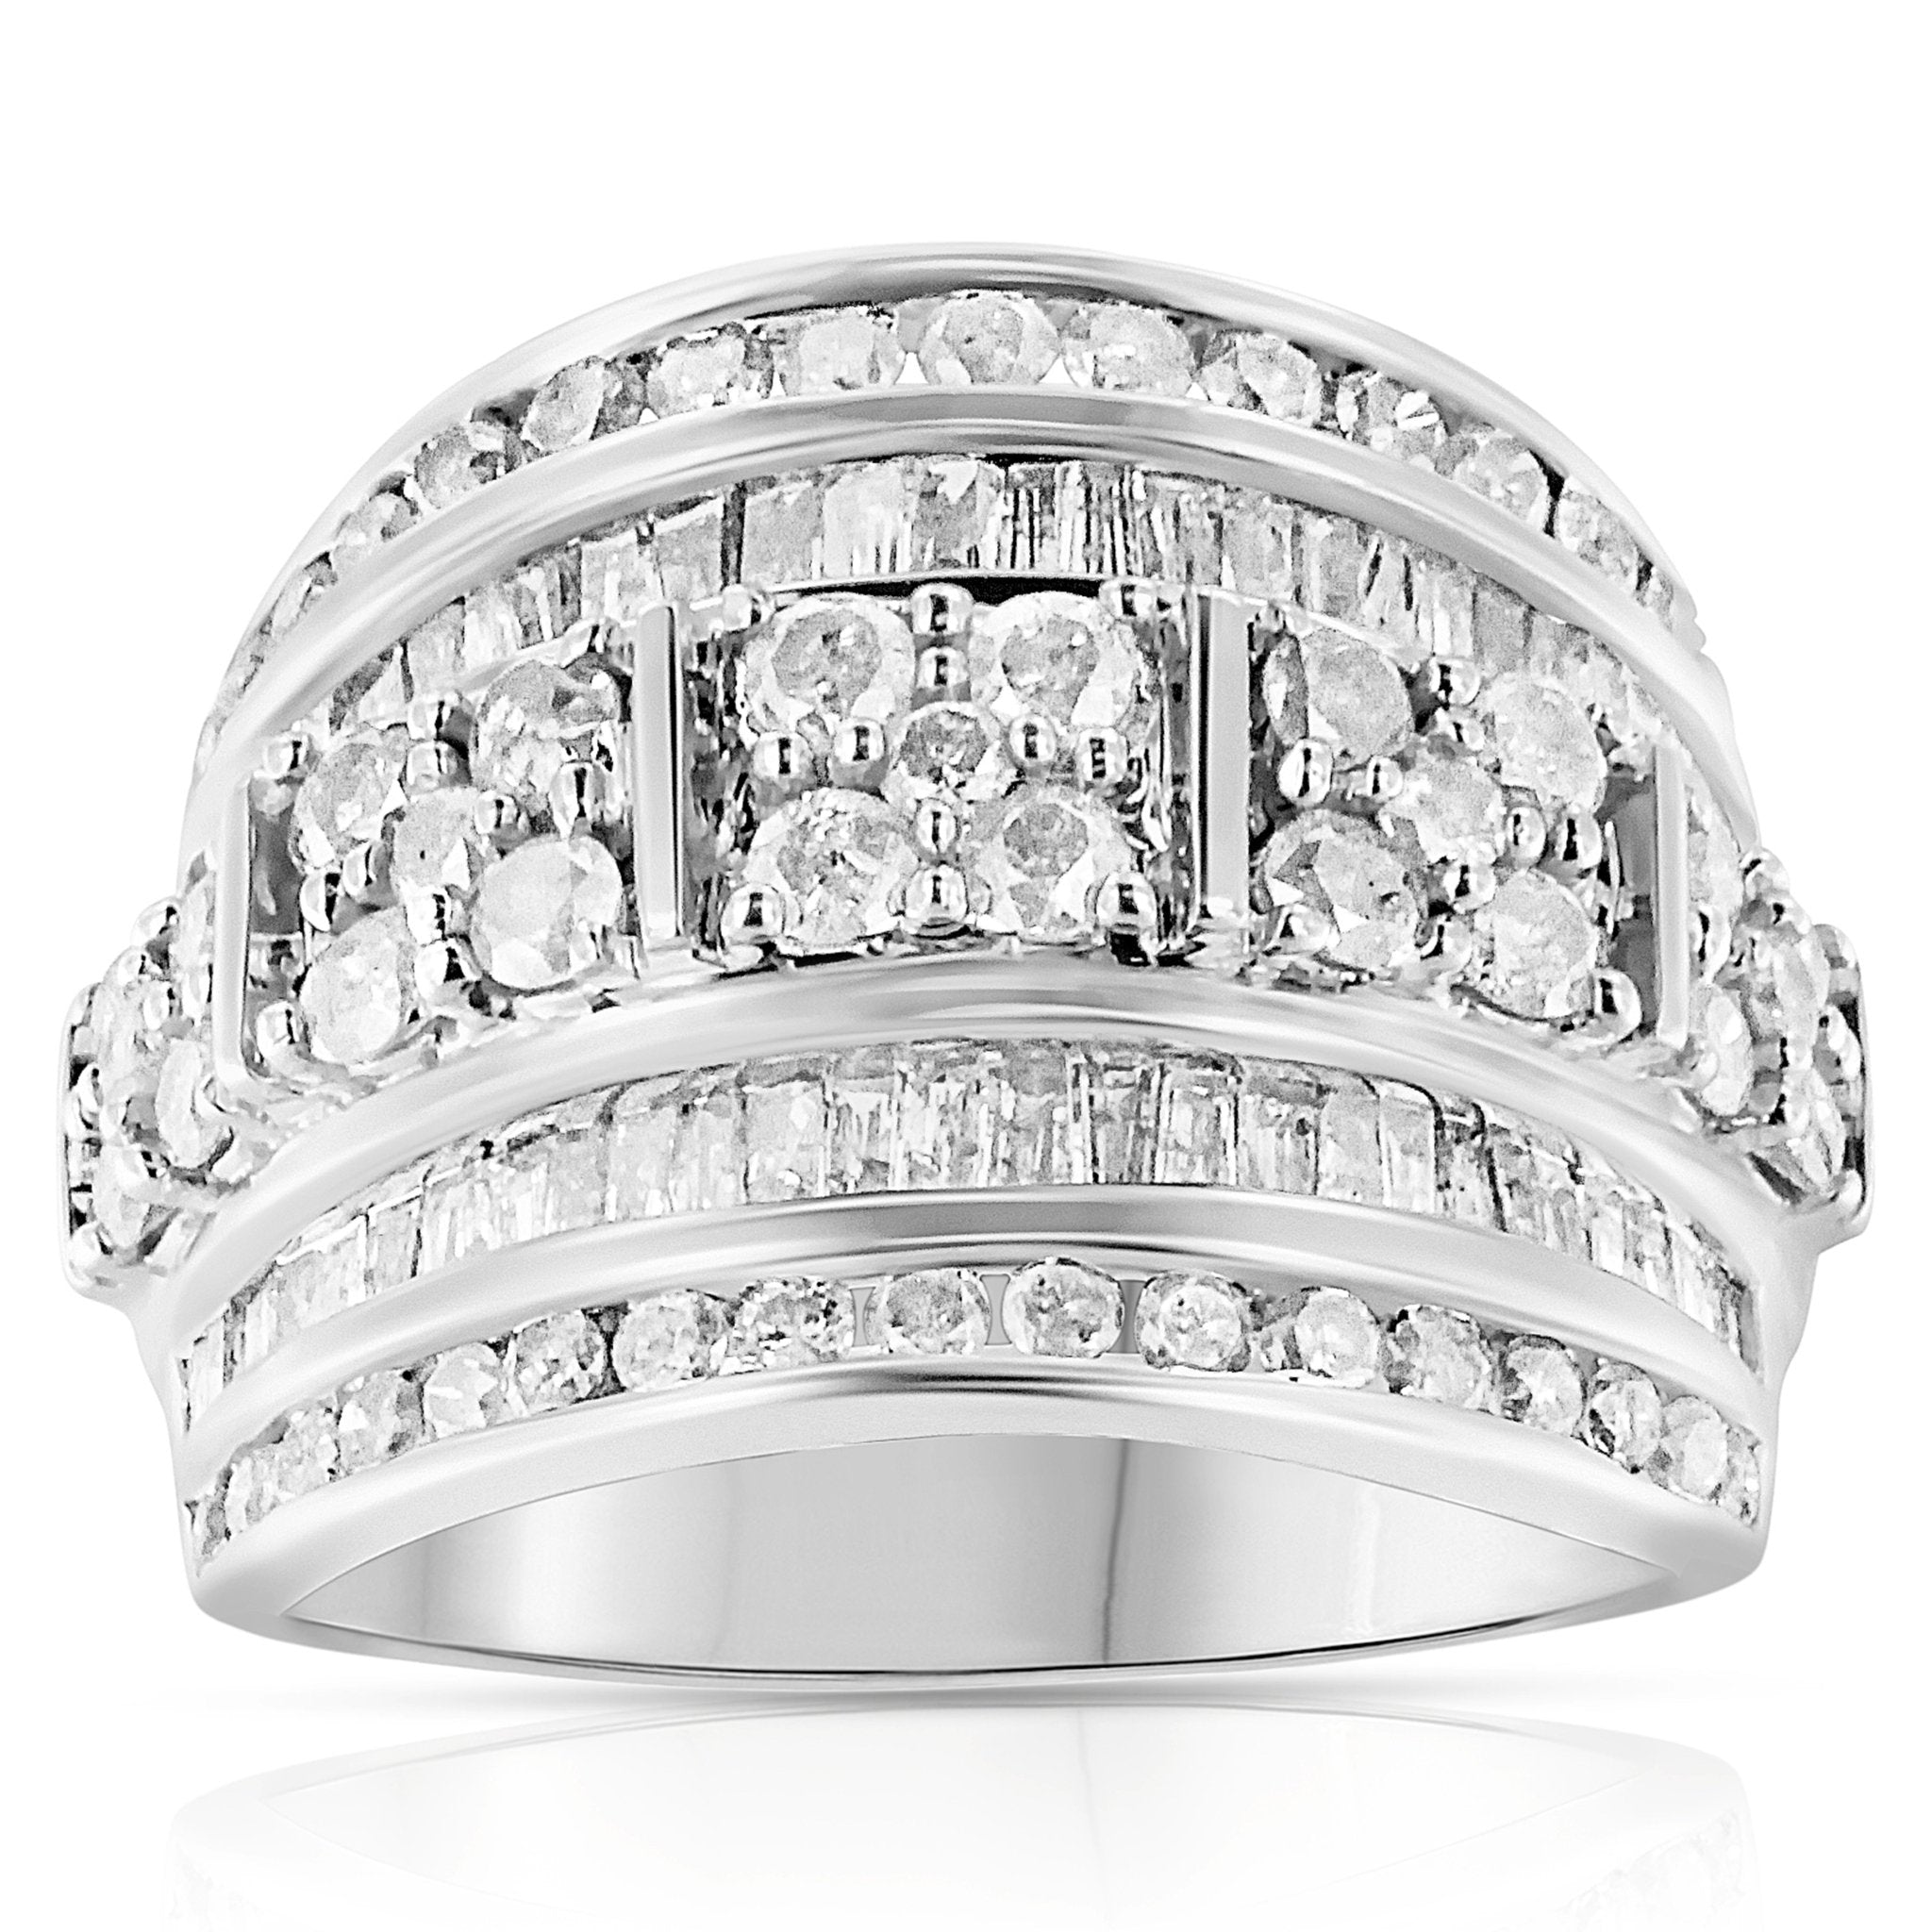 .925-Sterling-Silver-2.0-Cttw-Round-&-Baguette-Cut-Diamond-Multi-Row-Channel-Set-Tapered-Cocktail-Fashion-Ring-(I-J-Color,-I3-Clarity)-Size-6-Rings